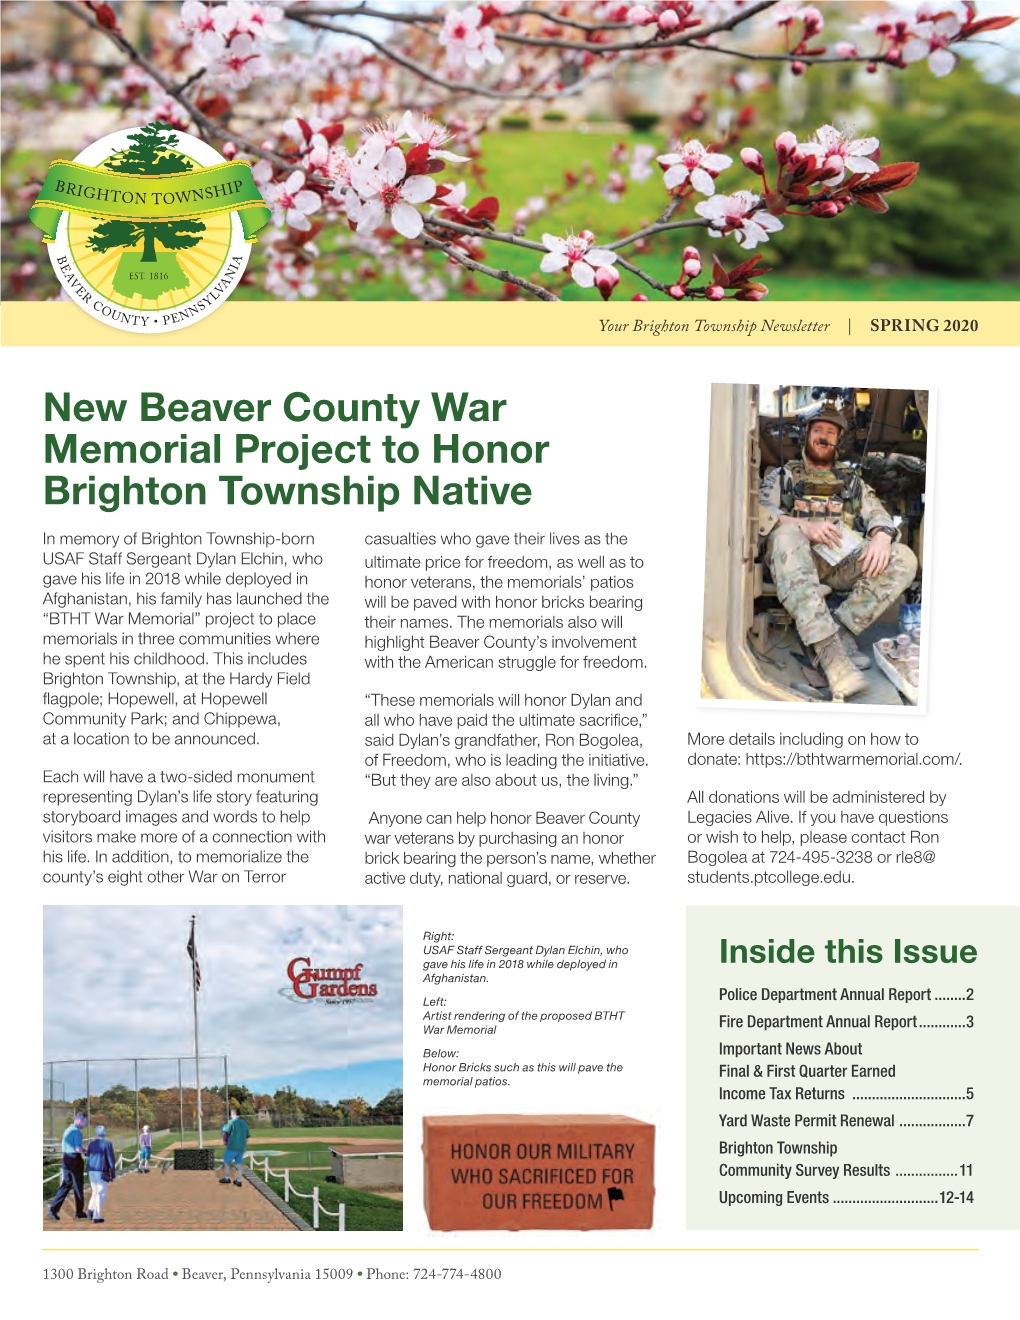 New Beaver County War Memorial Project to Honor Brighton Township Native